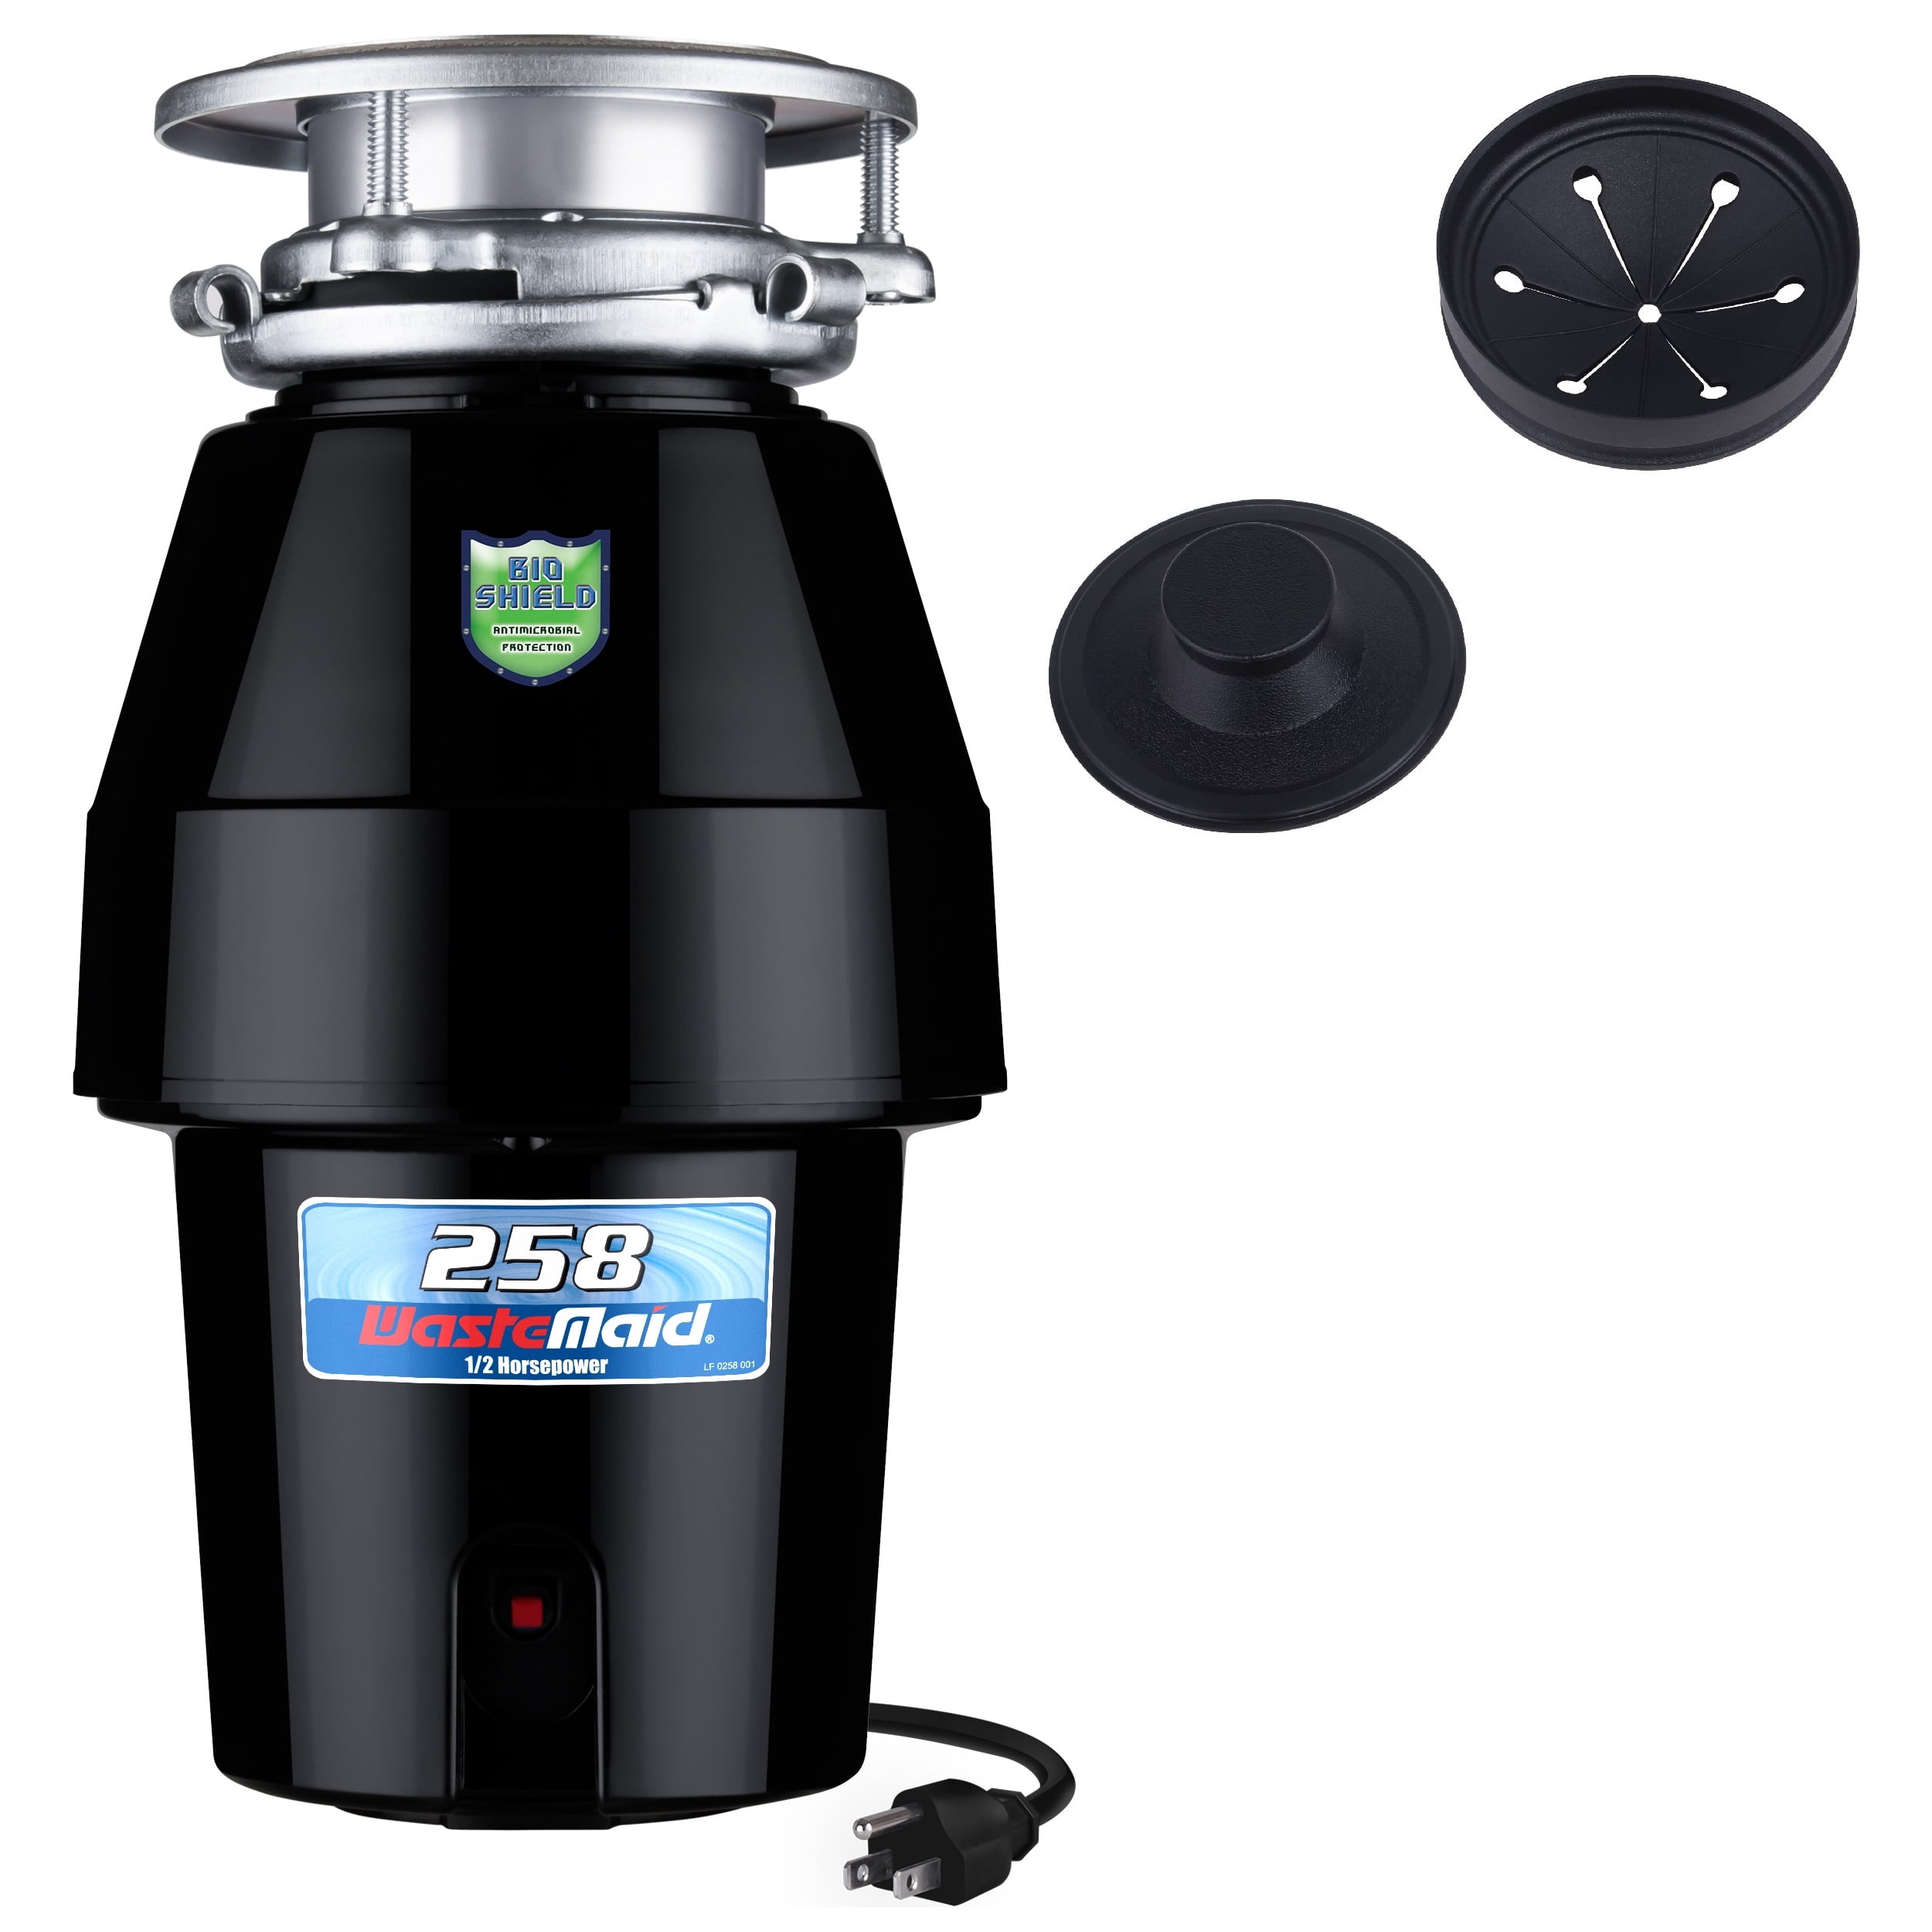 Waste Maid Economy 1/2 HP Continuous Feed Garbage Disposal 10-US-WM-058-3B 